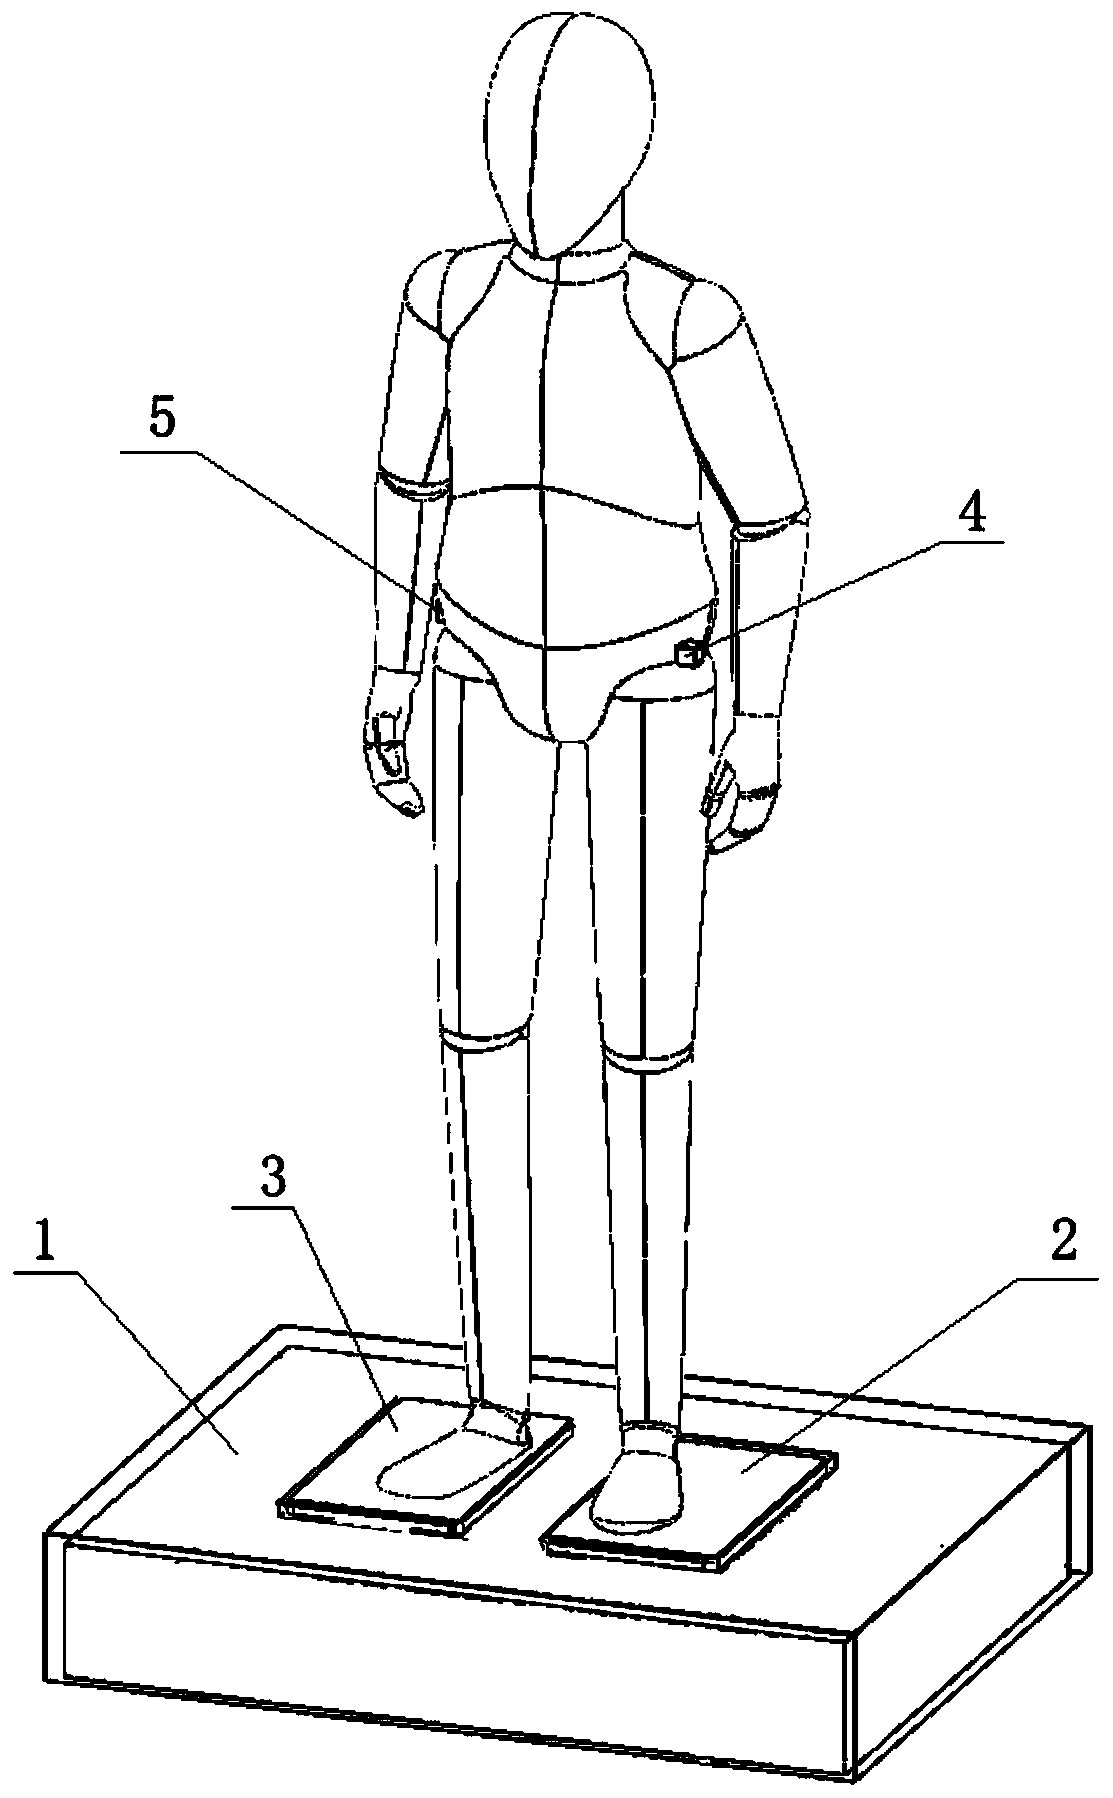 Accurate regulator for medical photography examination of children patients with unequal lengths of lower limbs